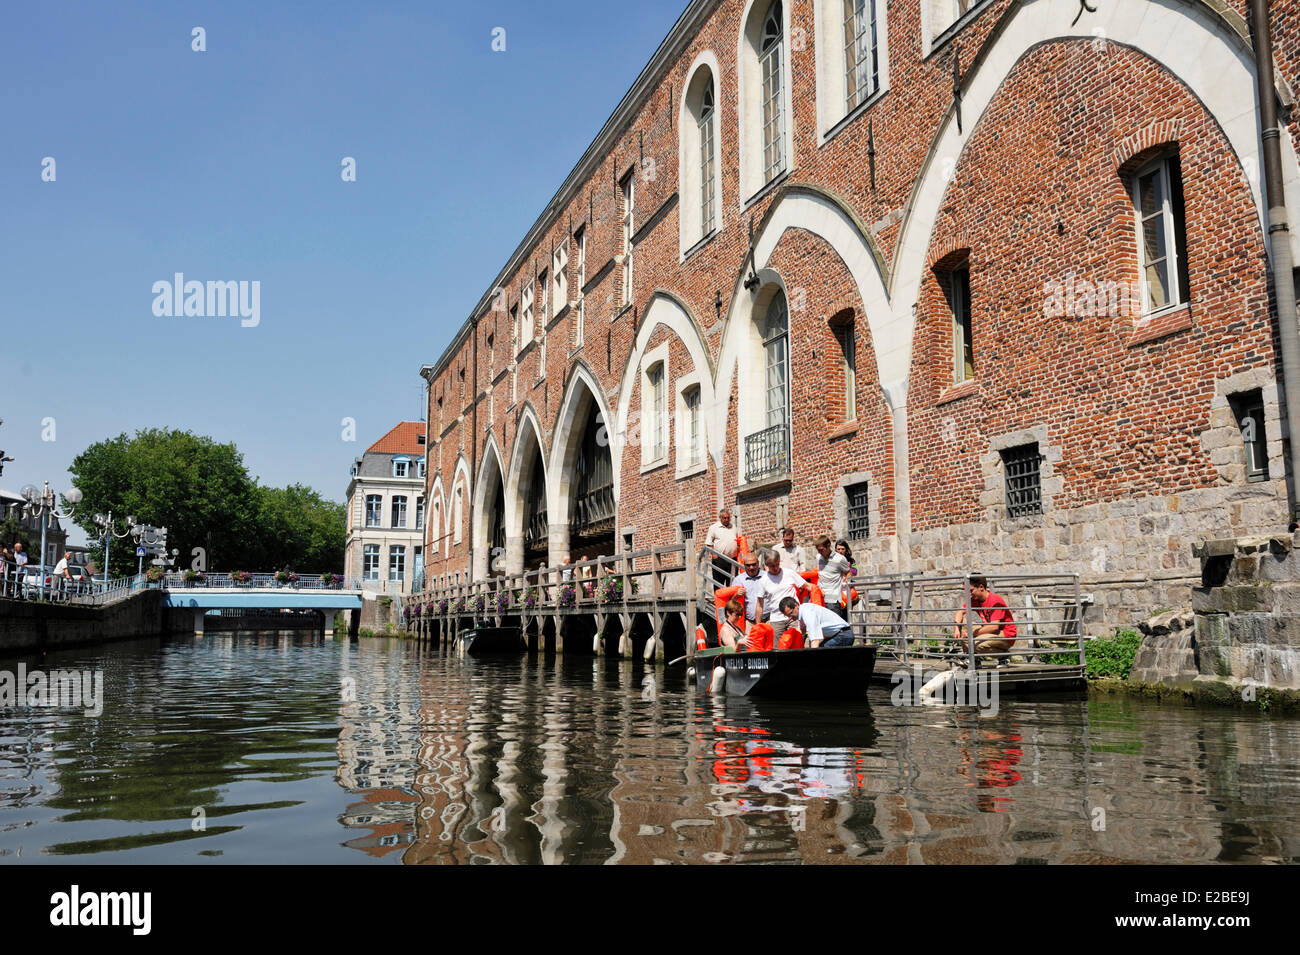 France, Nord, Douai, stroll on the canals along the Courthouse Stock Photo